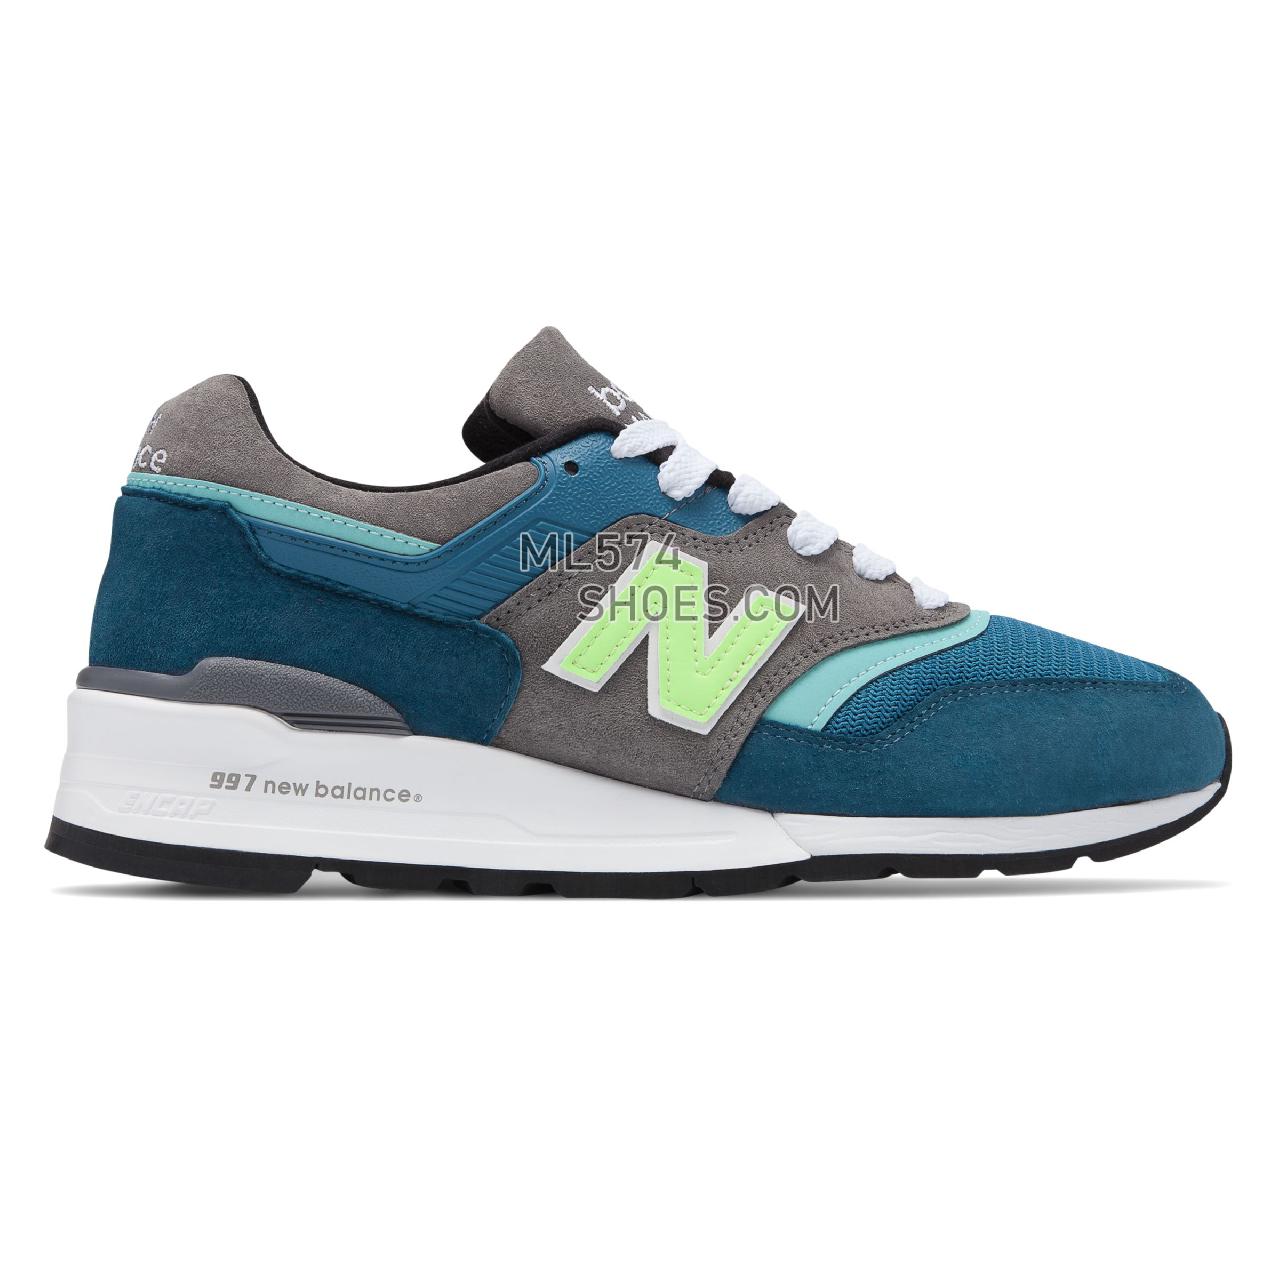 New Balance Made in US 997 - Men's 997 Made in US Classic M997-PGM - Blue with Green - M997PAC